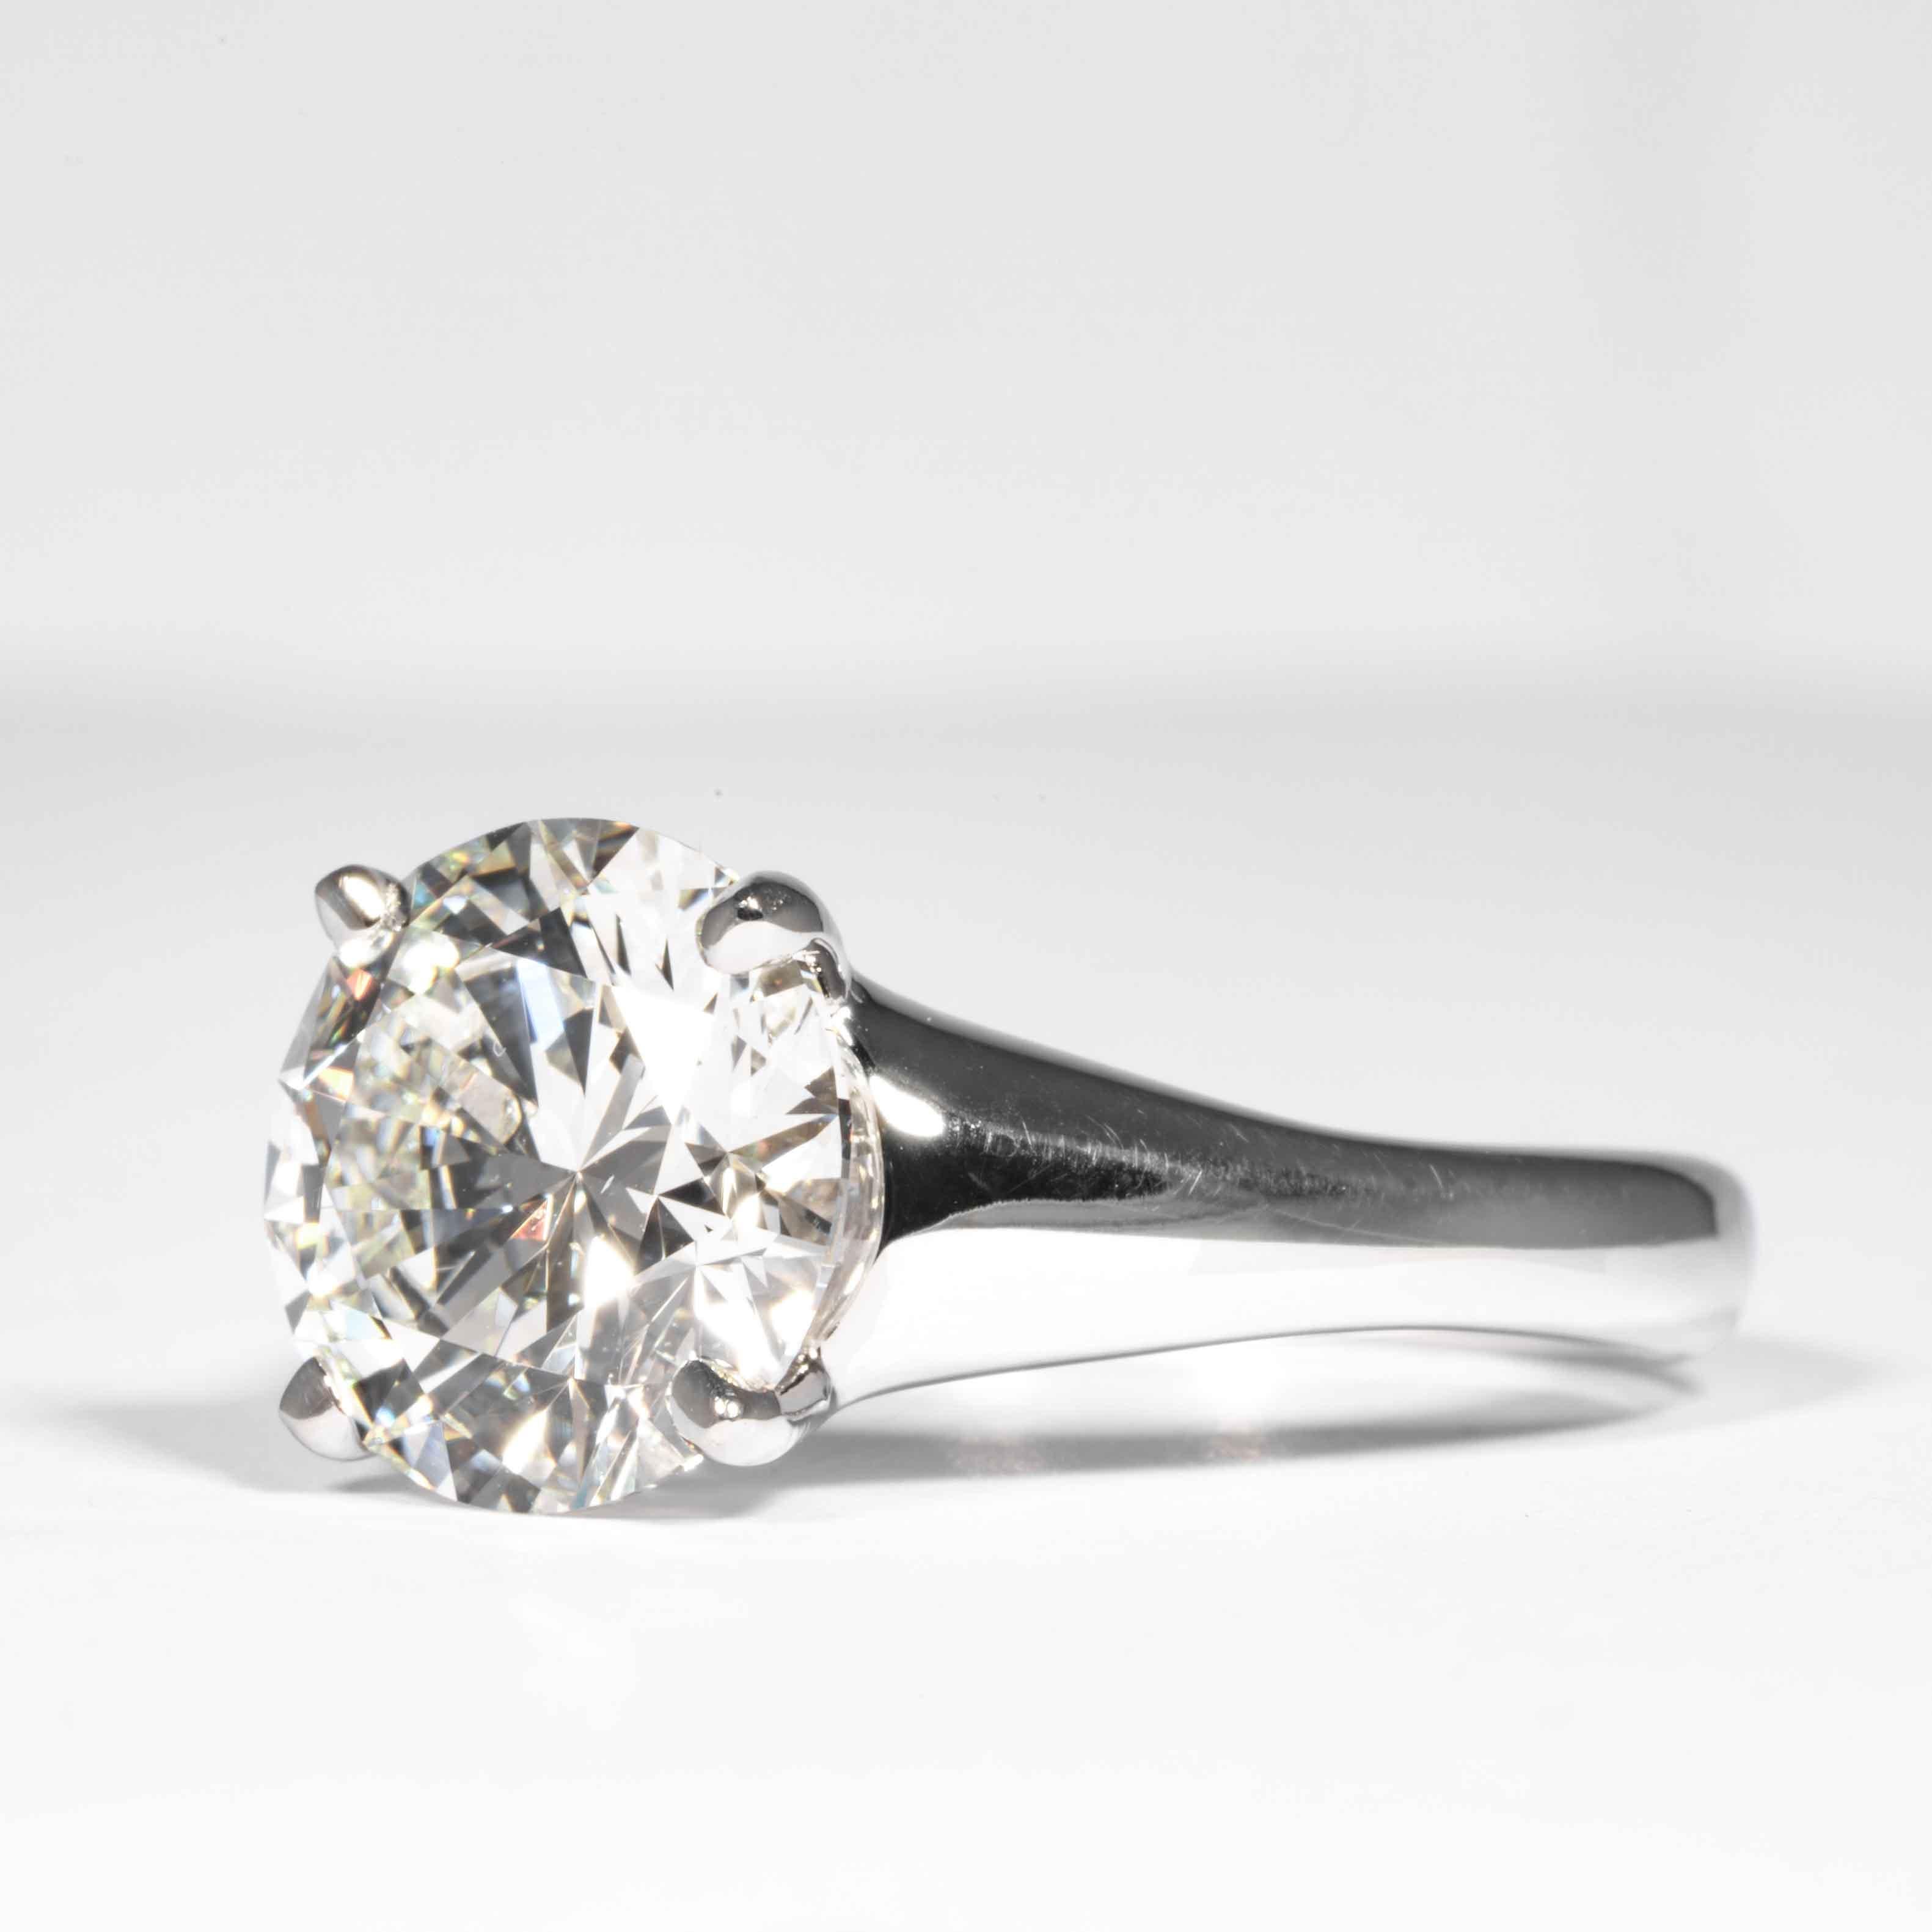 Shreve, Crump & Low GIA Certified 4.26 Carat H SI1 Round Brilliant Diamond Ring In New Condition For Sale In Boston, MA